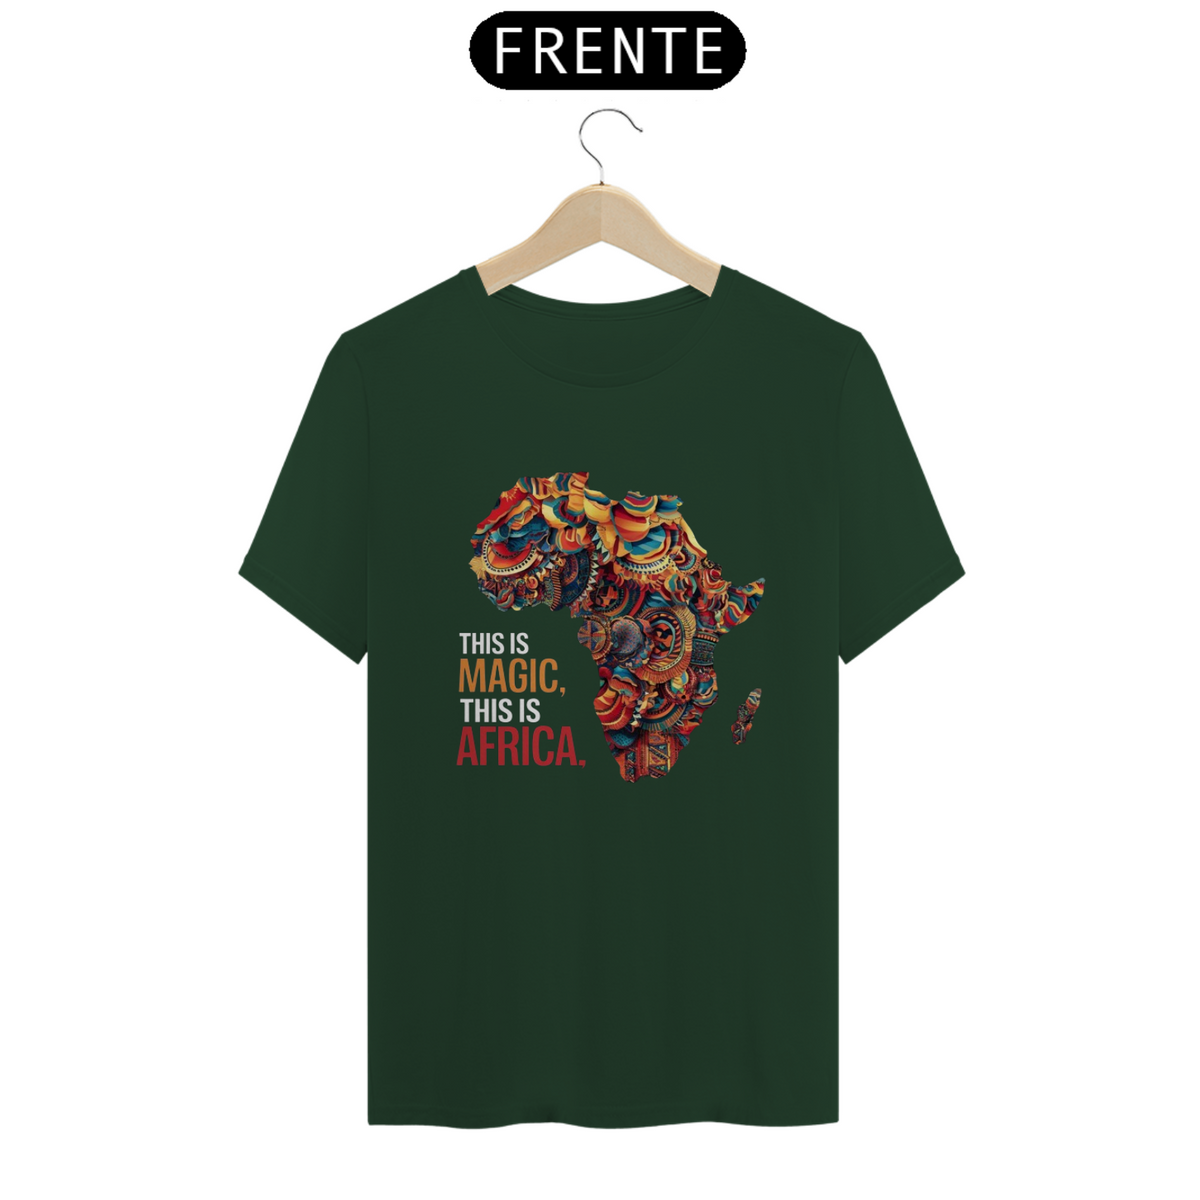 Nome do produto: T-Shirt Classic THIS IS AFRICA